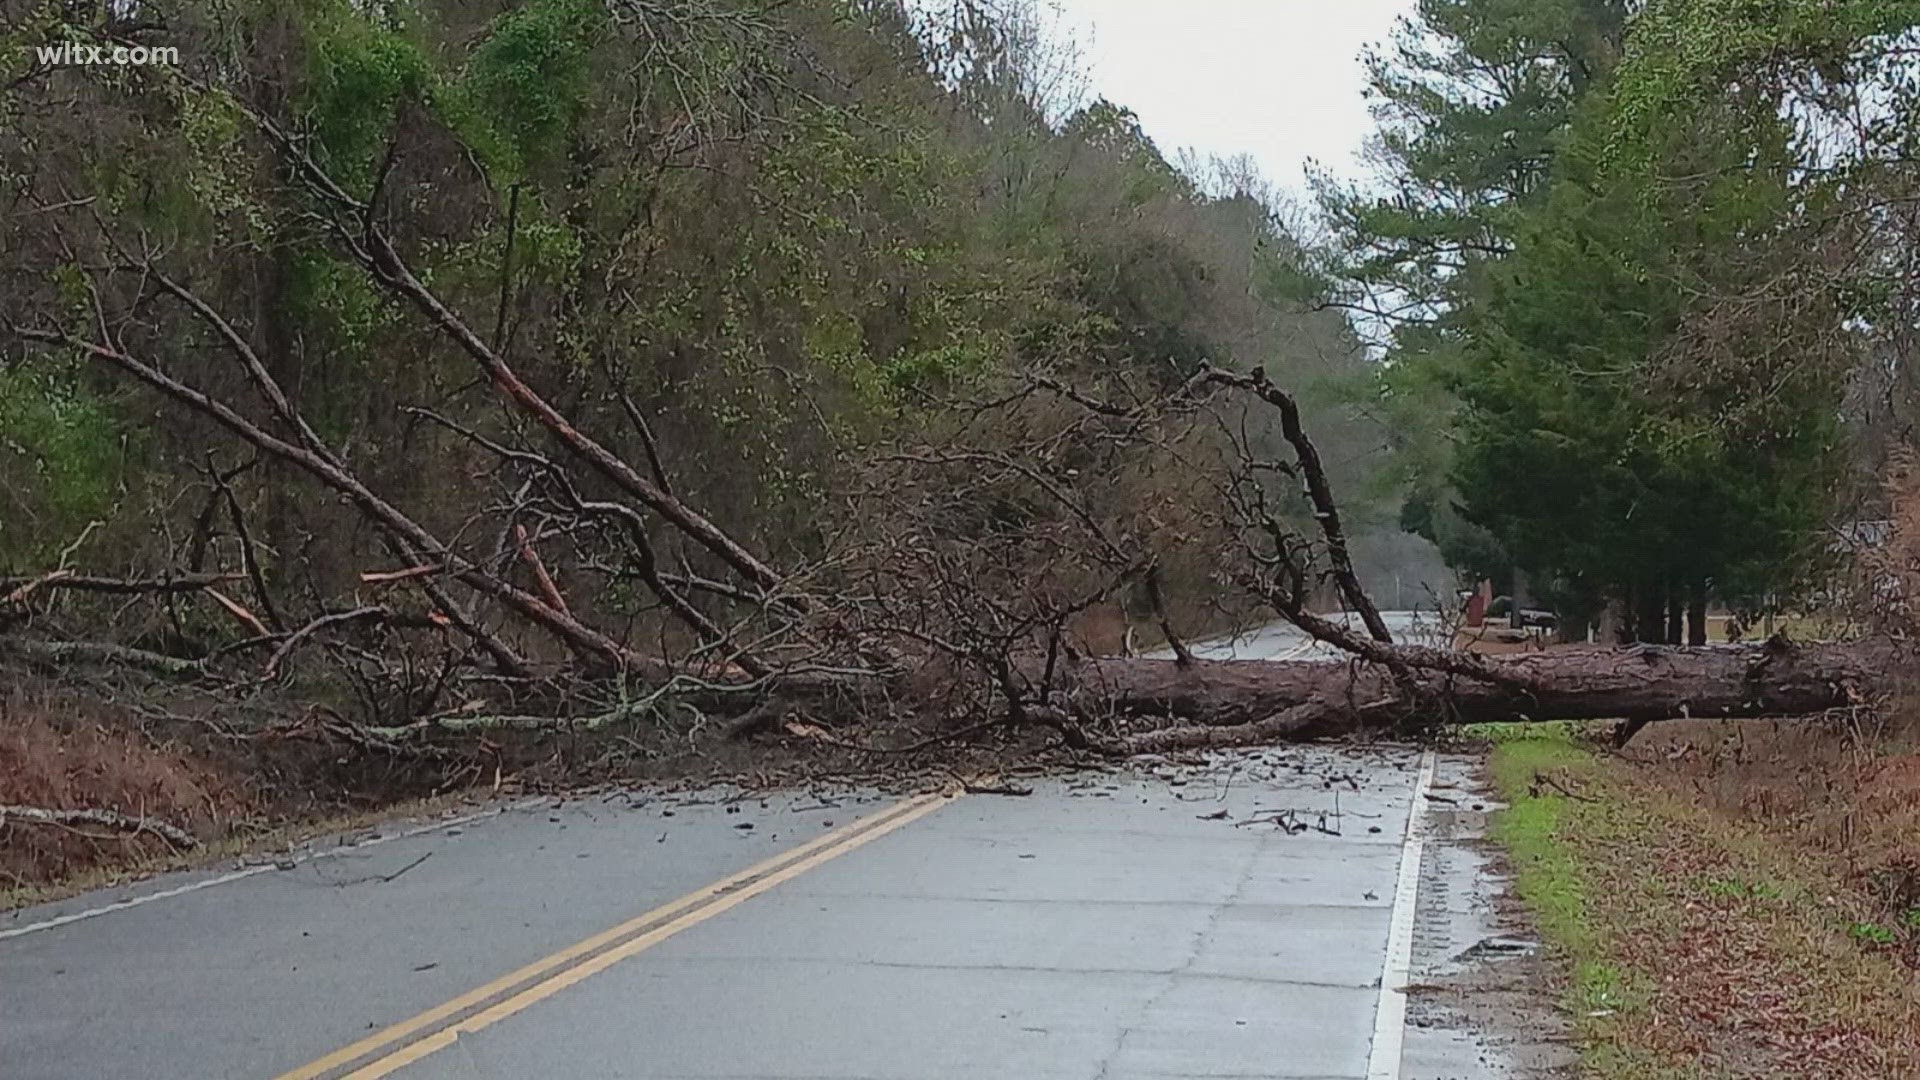 WLTX viewers sent in photos of the storm damage.